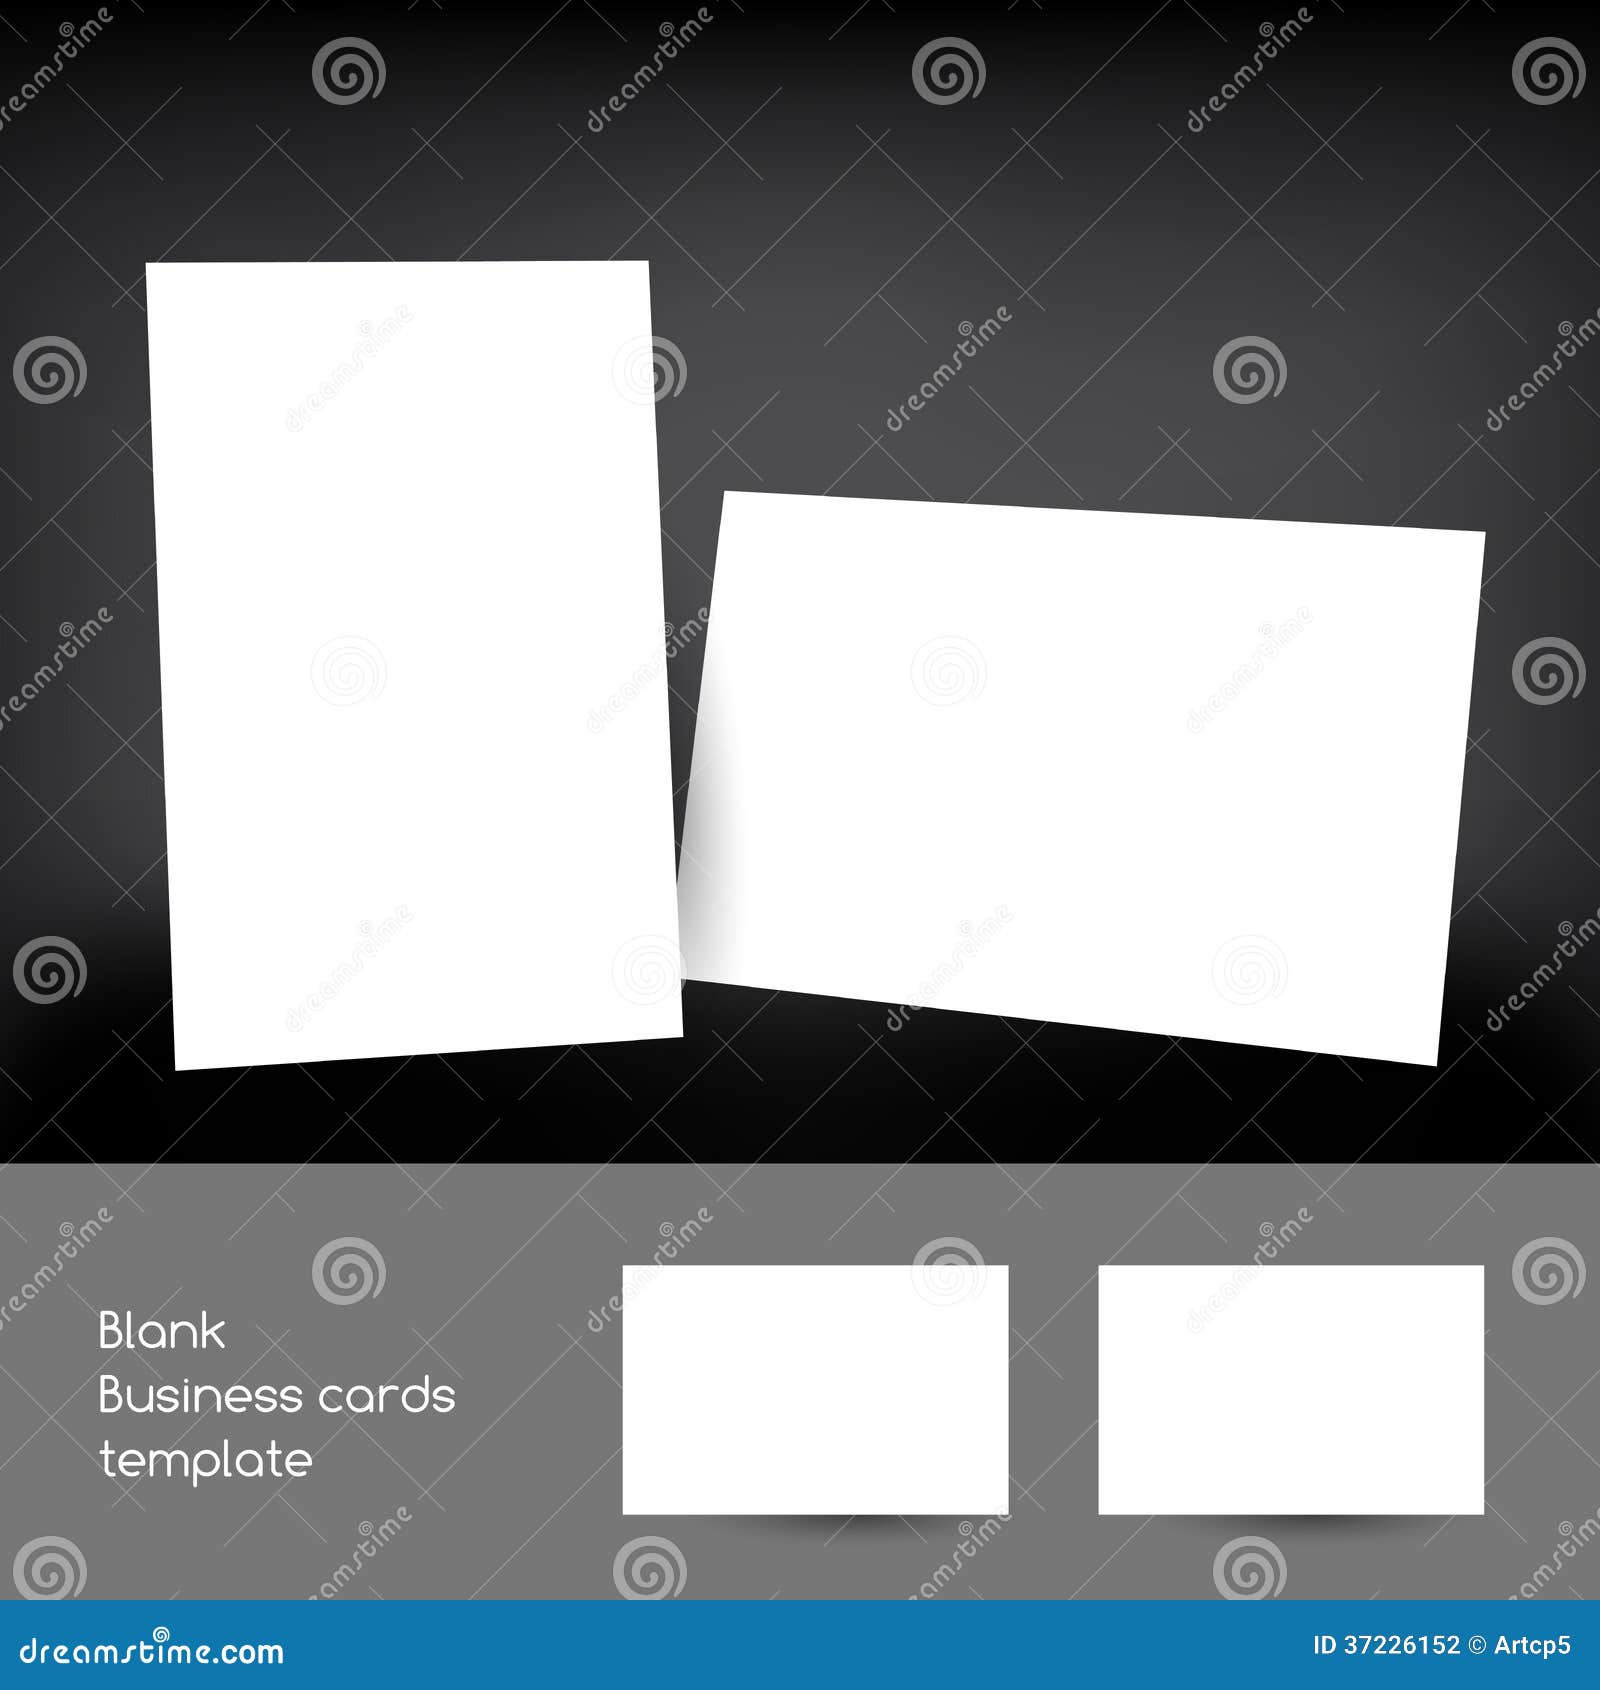 Blank Business Cards, Vectors